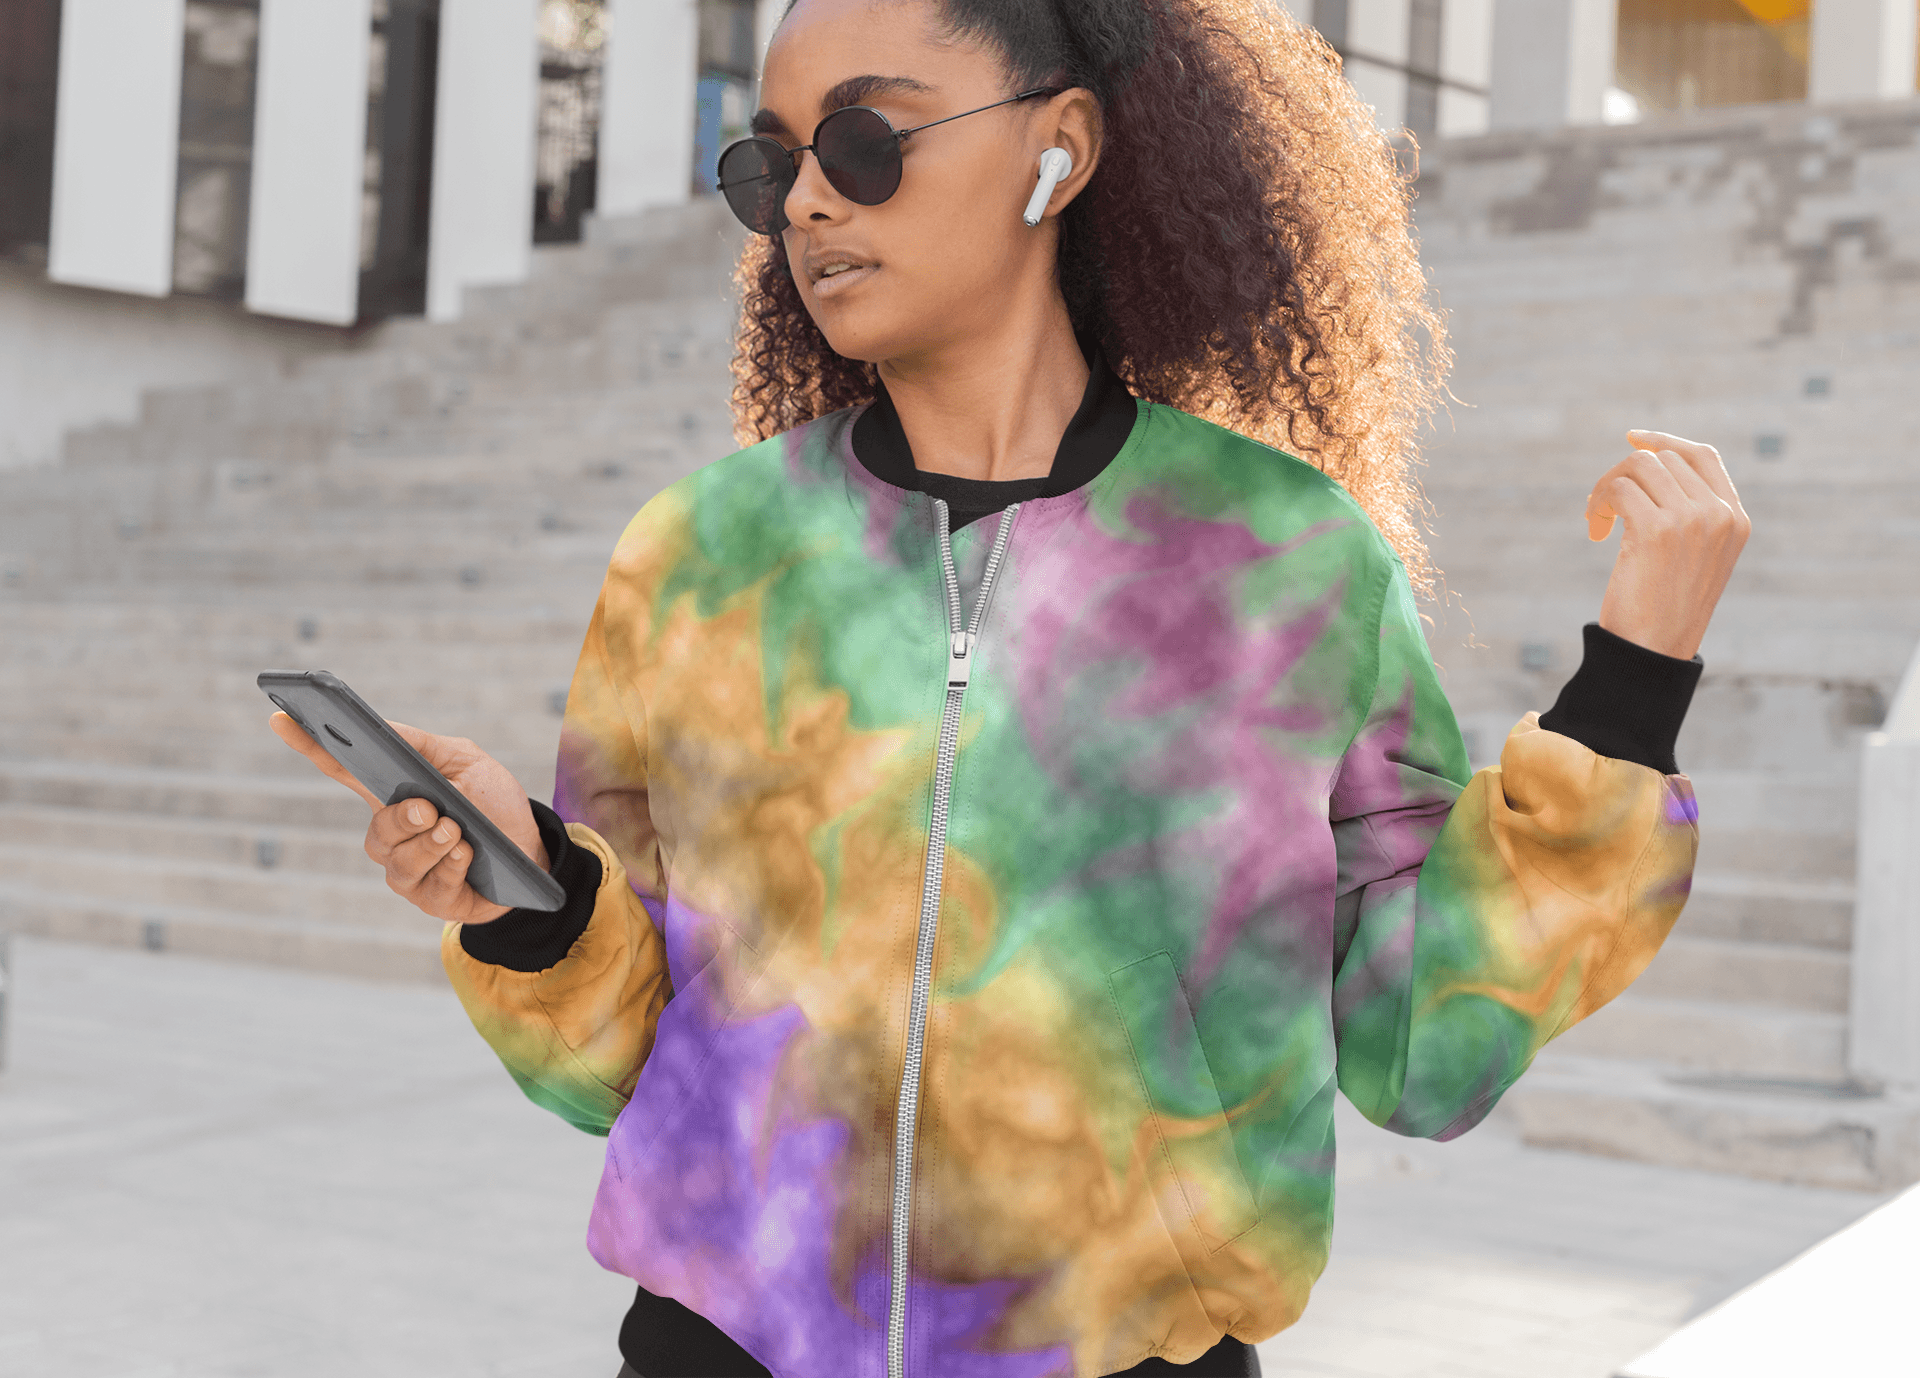 Multicolour Tie & Dye Bomber Jacket - The Accessorys Official